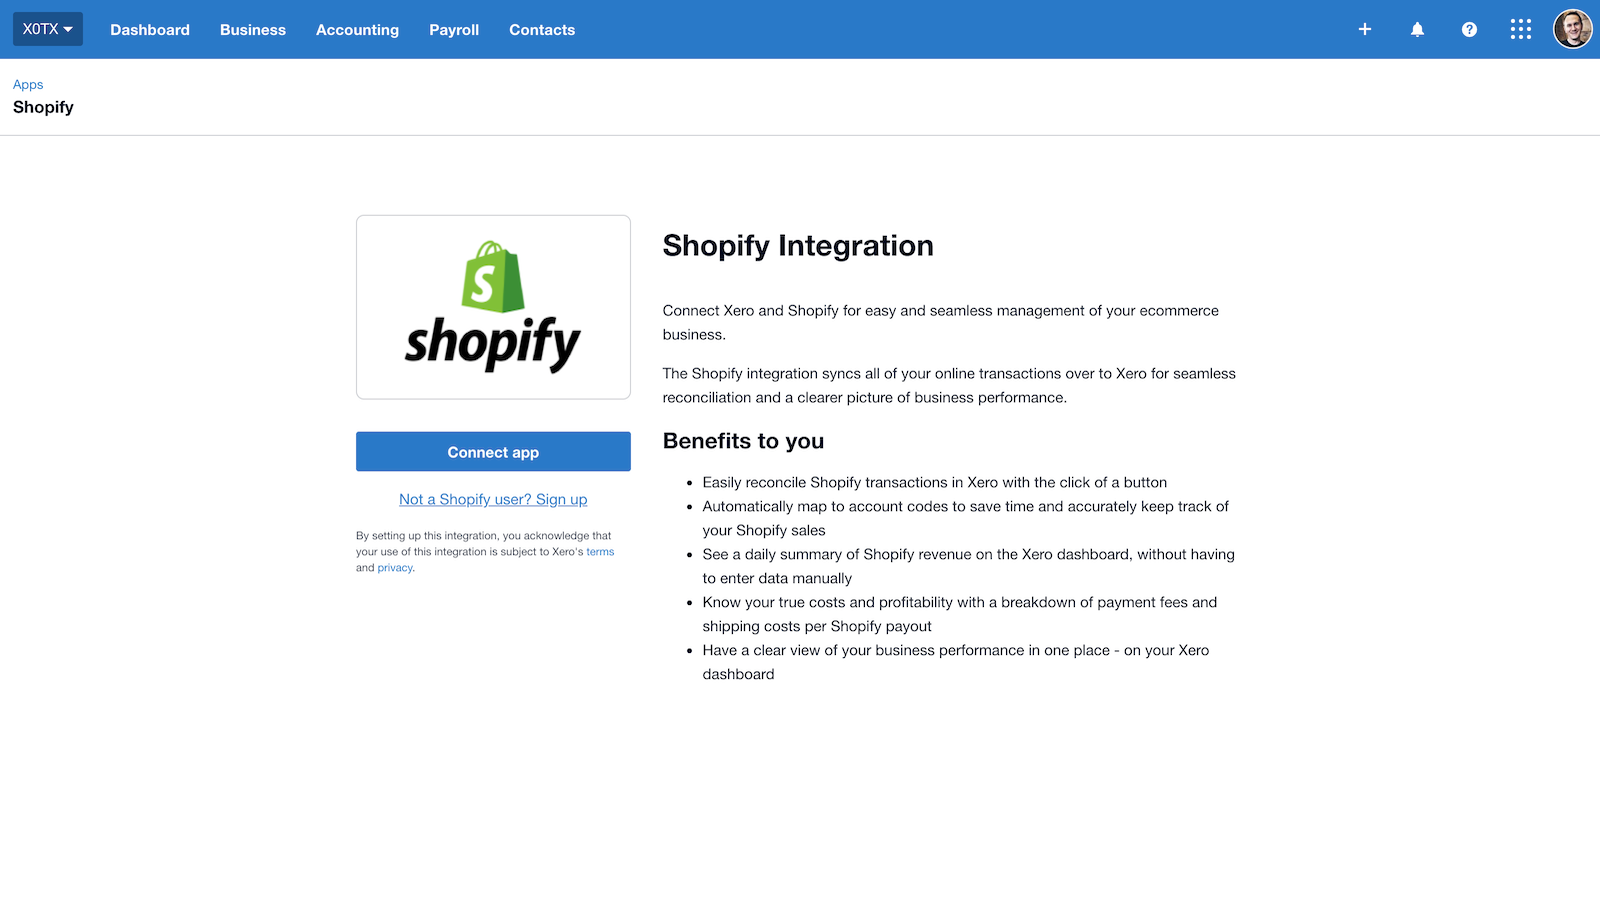 Connect Xero and Shopify